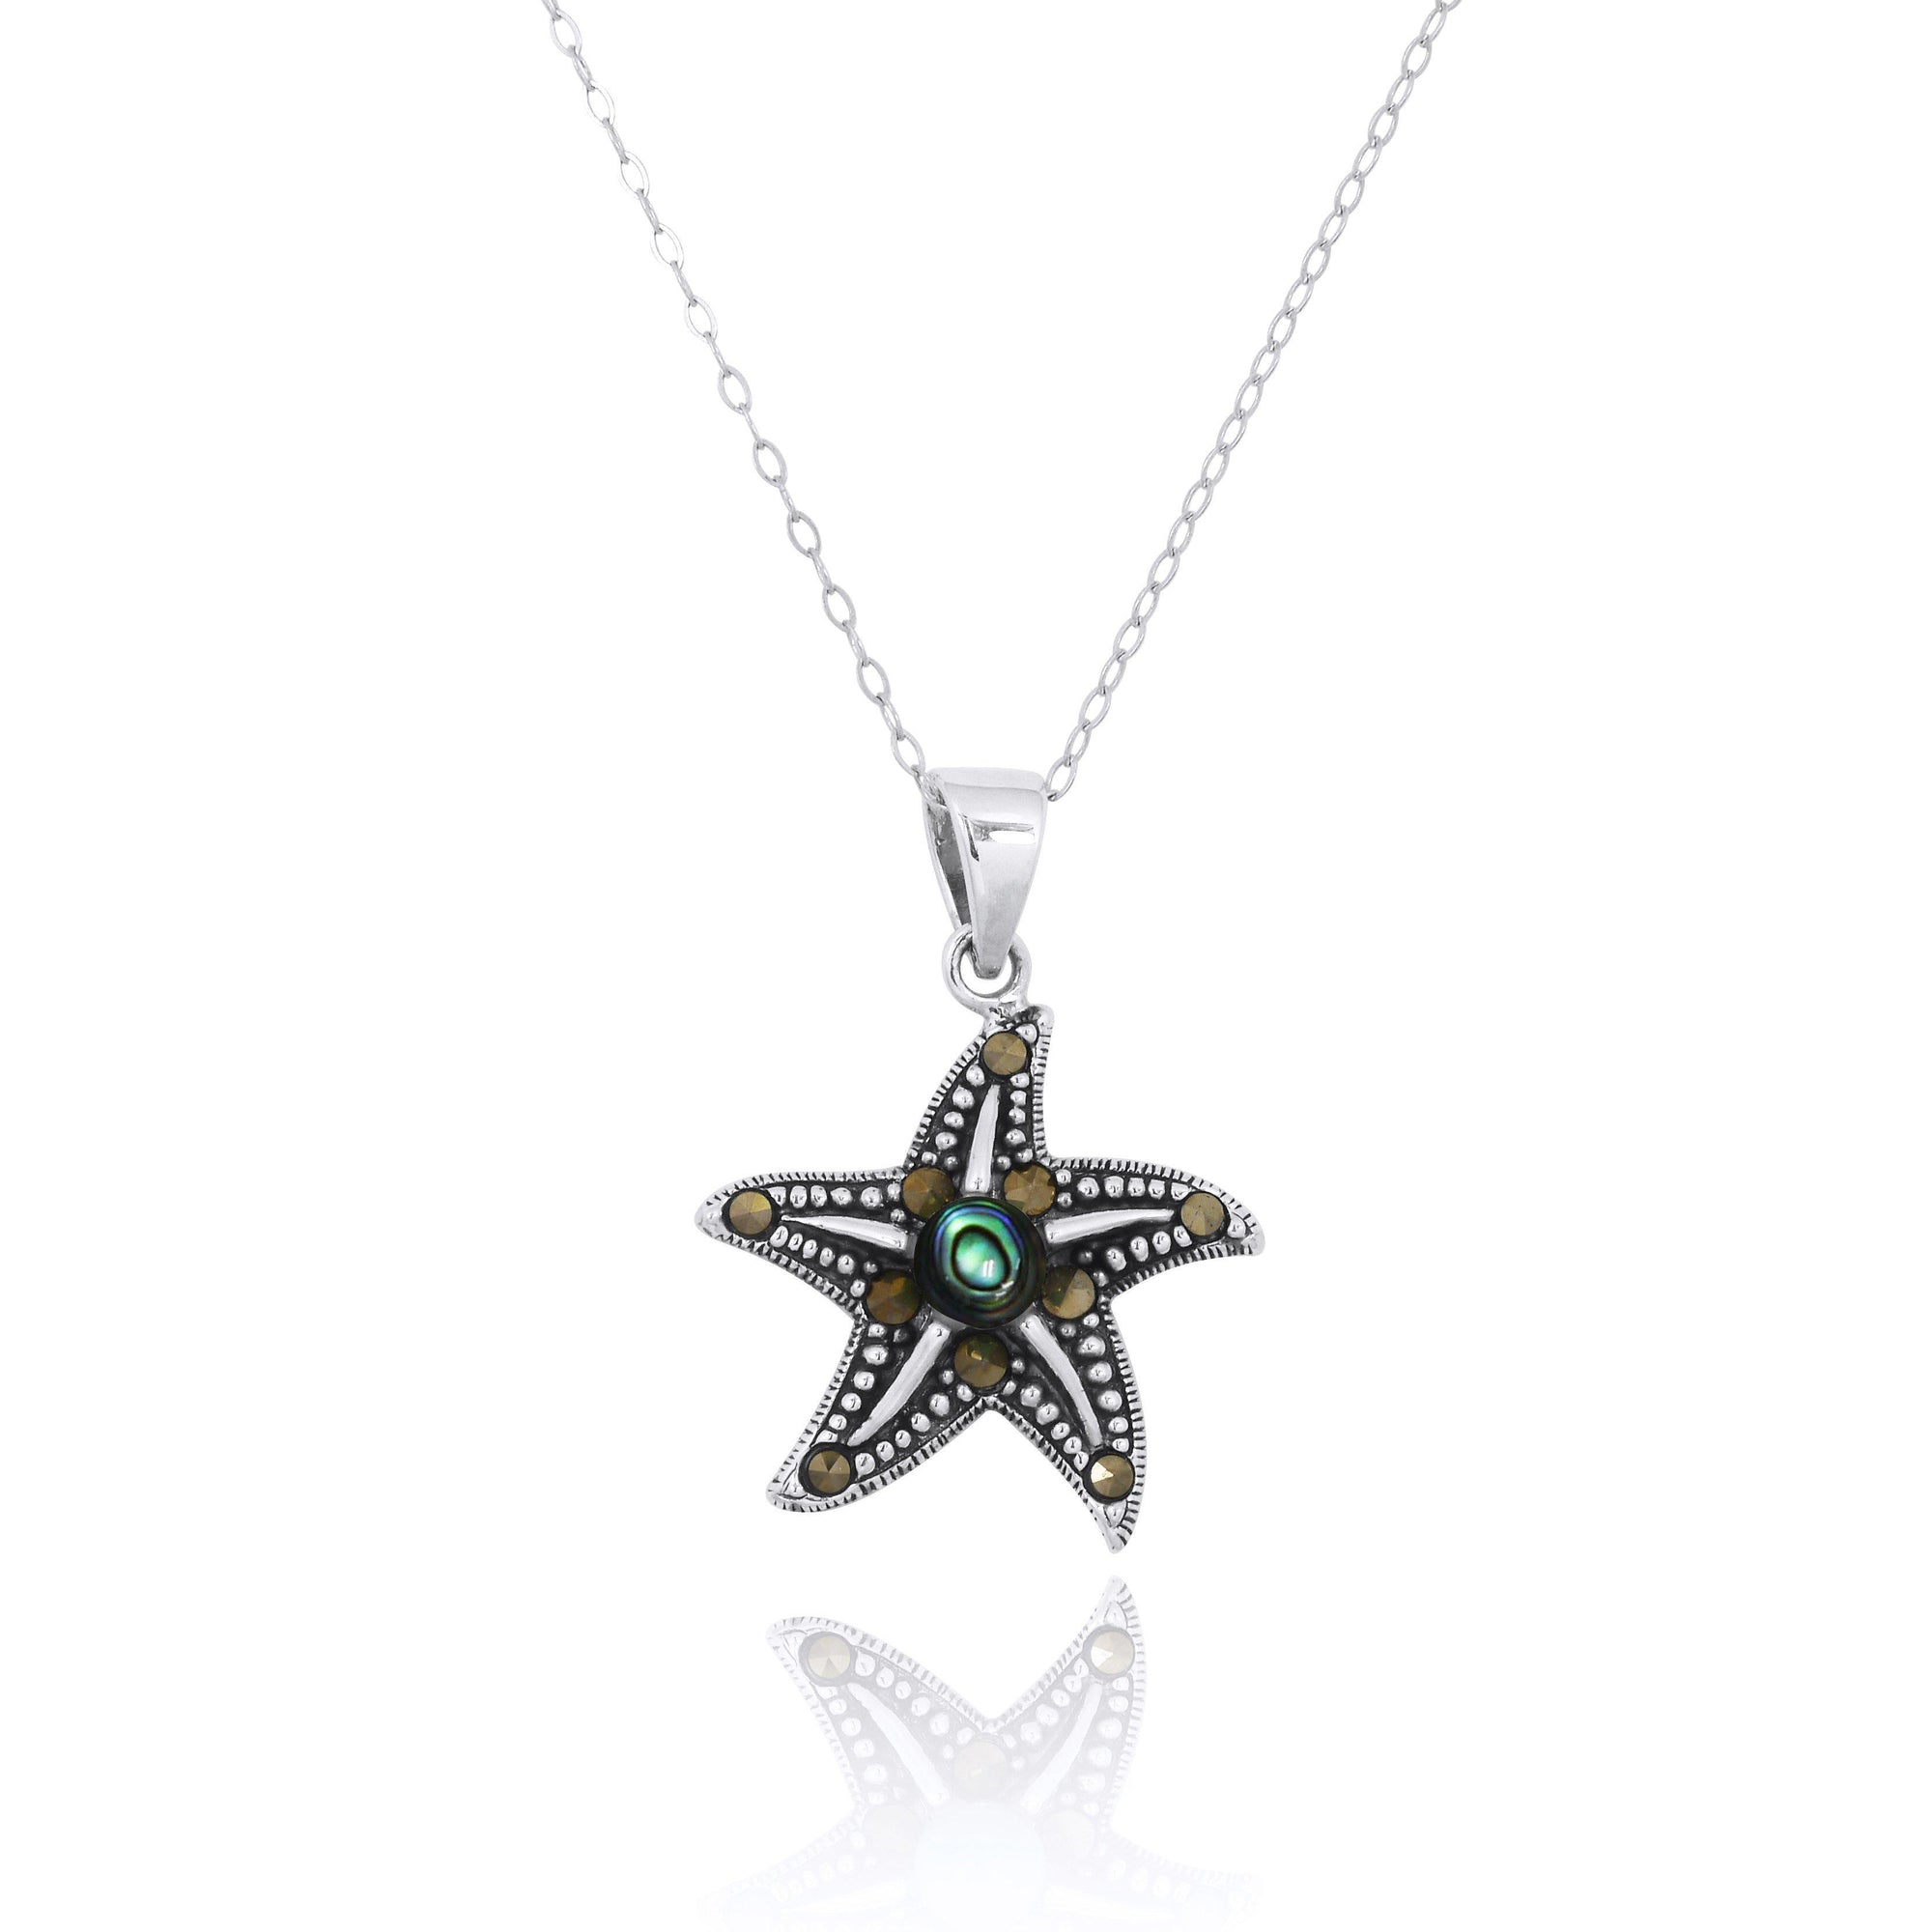 Sterling Silver Starfish Pendant Necklace with Marcasite and Round Abalone Shell